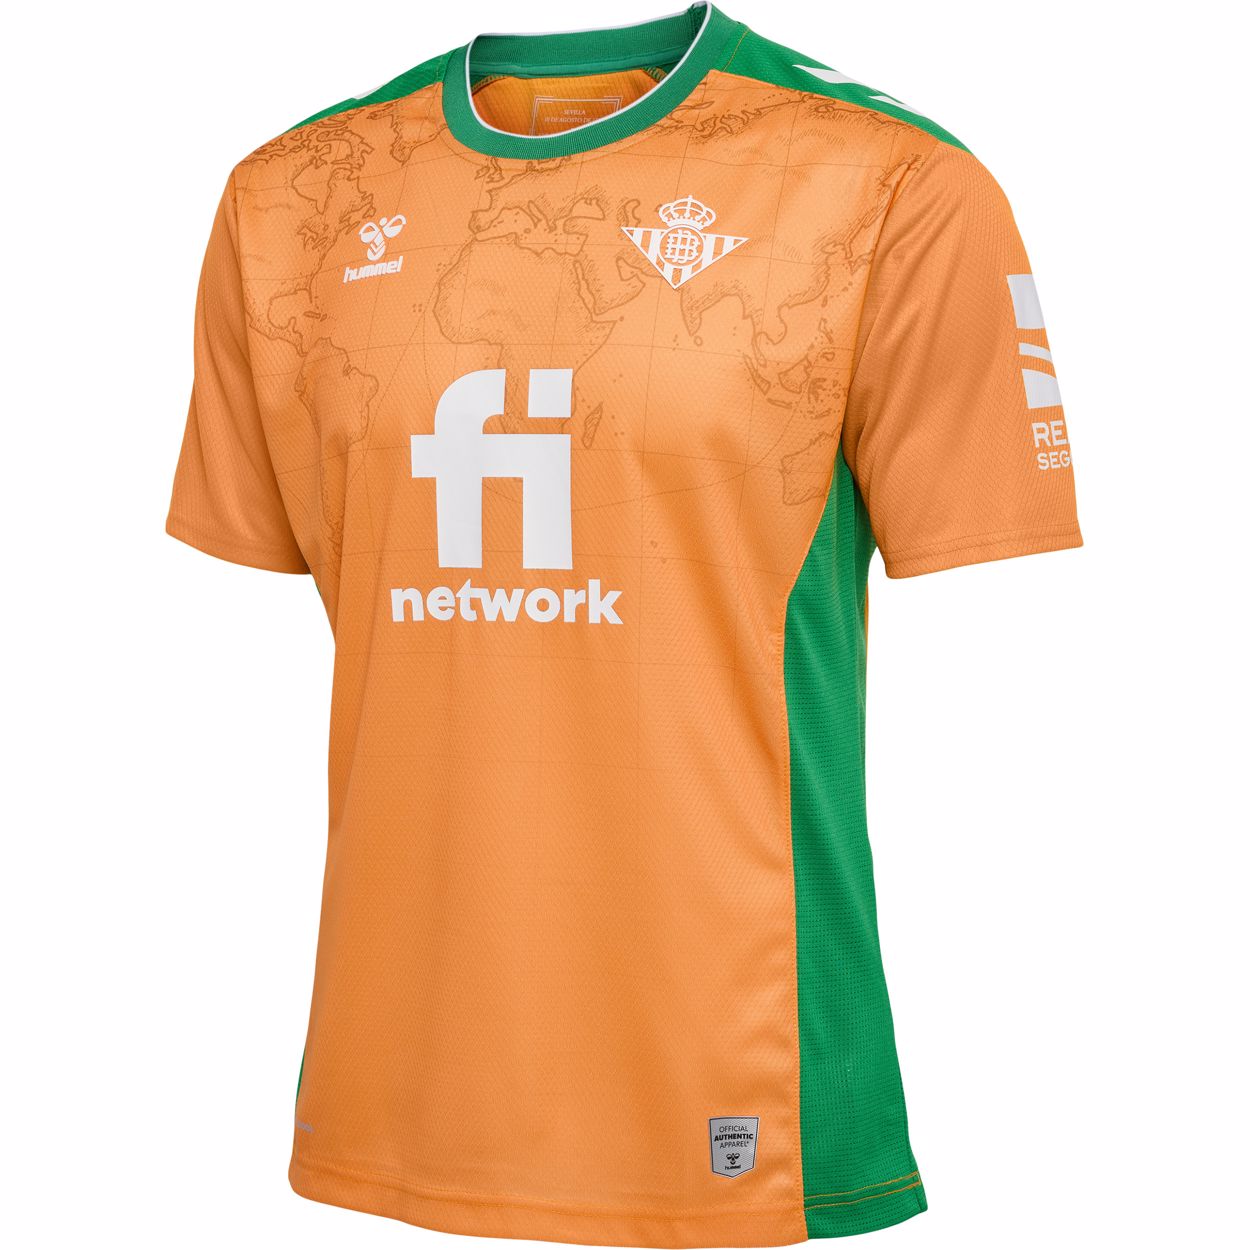 REAL BETIS 22/23 3RD JERSEY S/S